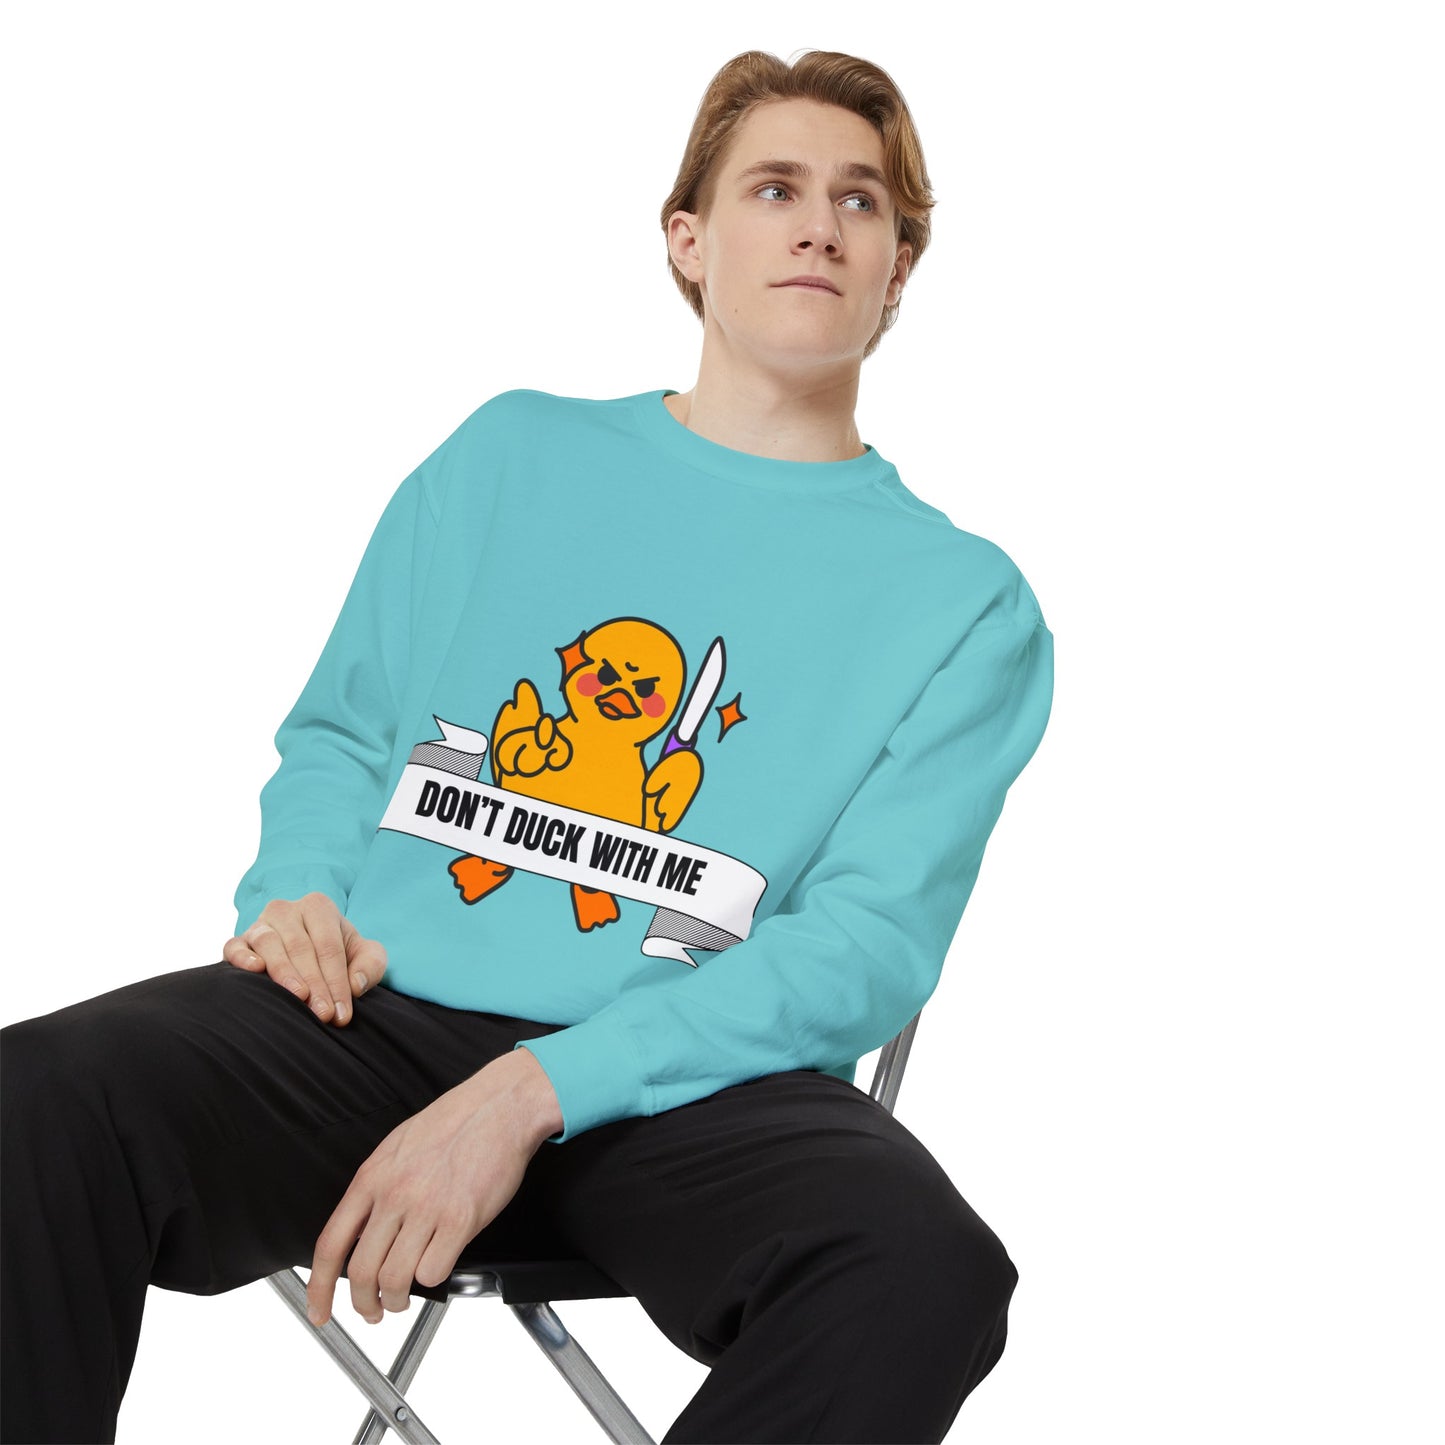 Don't Duck with Me! Garment-Dyed Sweatshirt